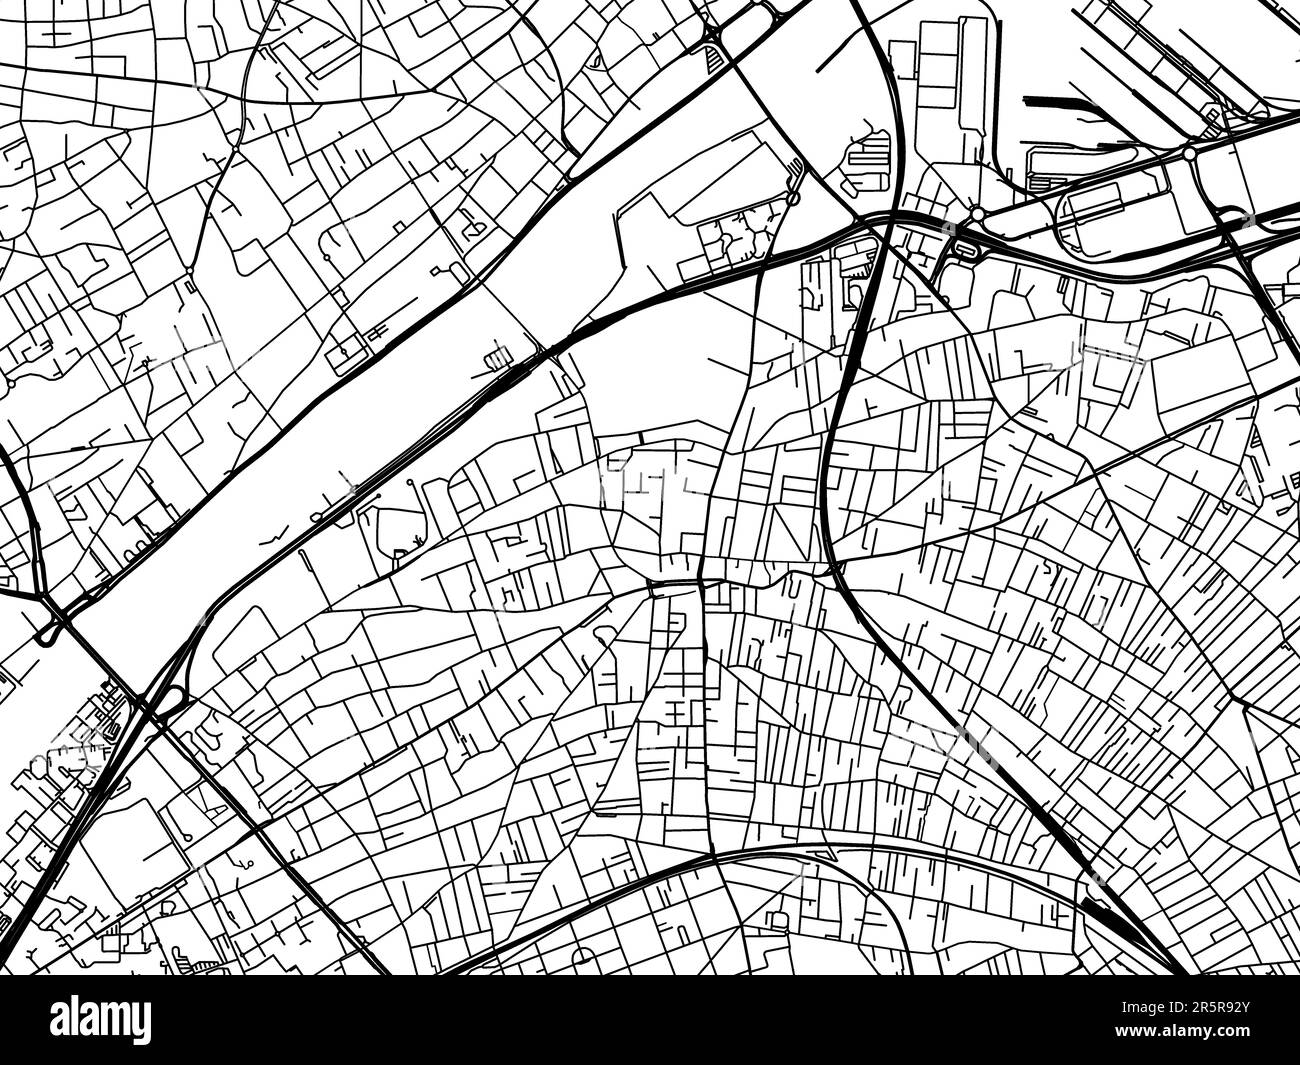 Road map of the city of  Colombes in France on a white background. Stock Photo